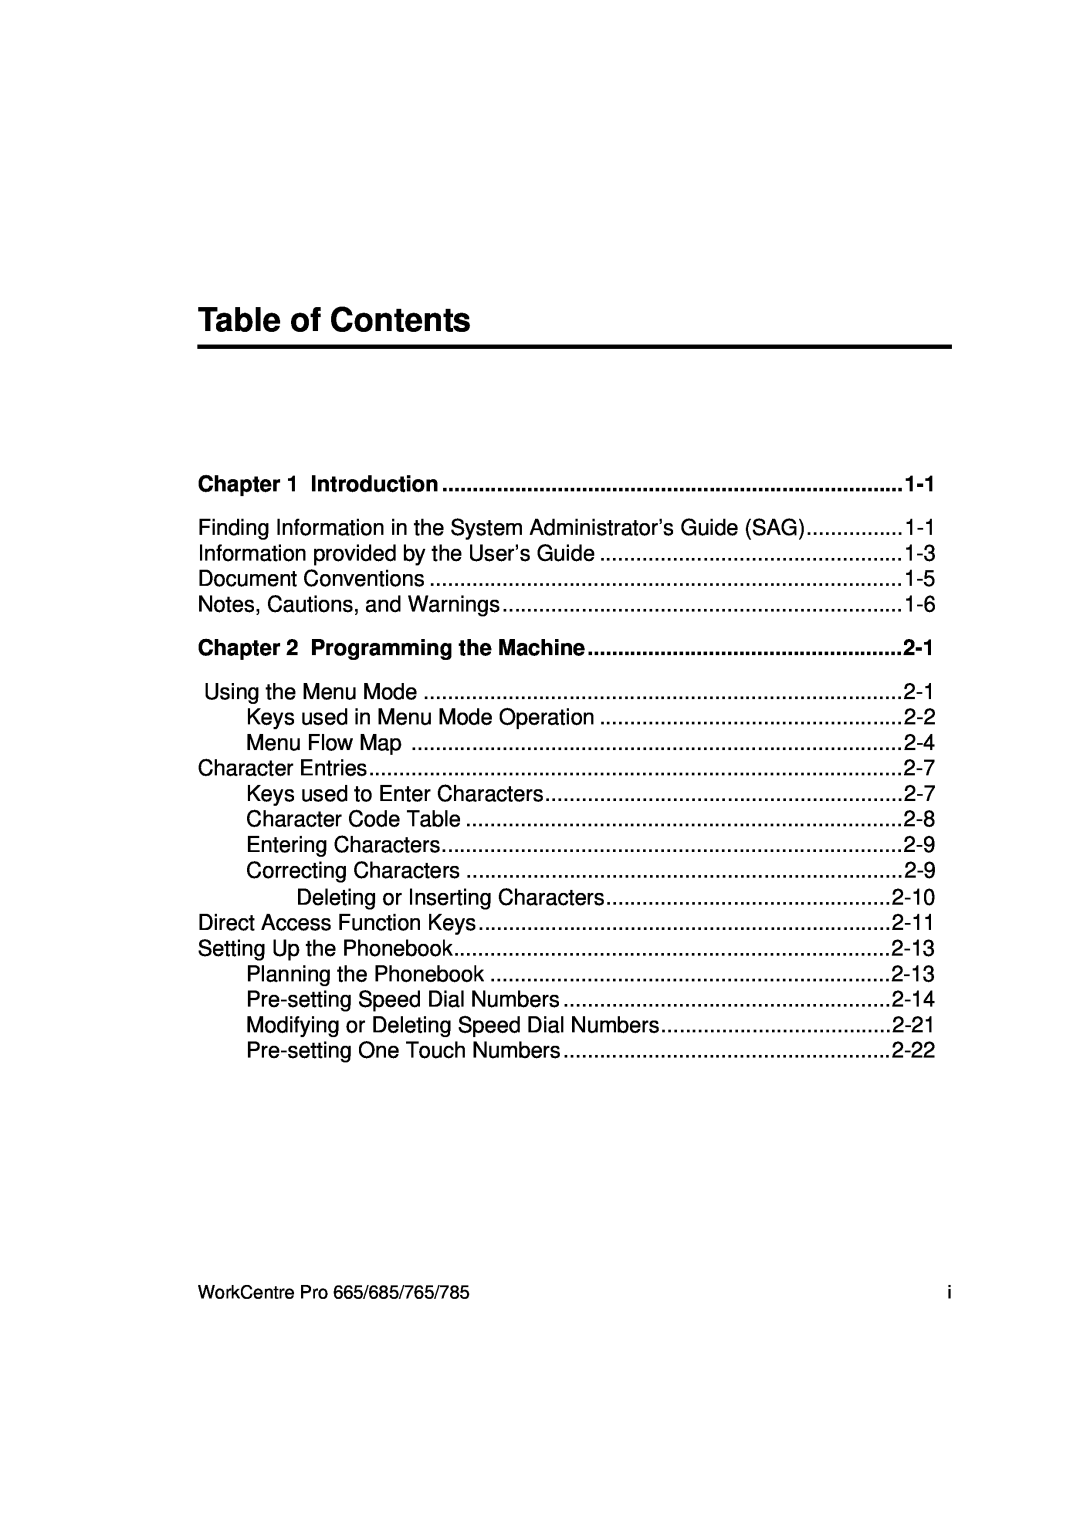 Xerox 785, 765, 665, 685 manual Table of Contents, Introduction, Programming the Machine 